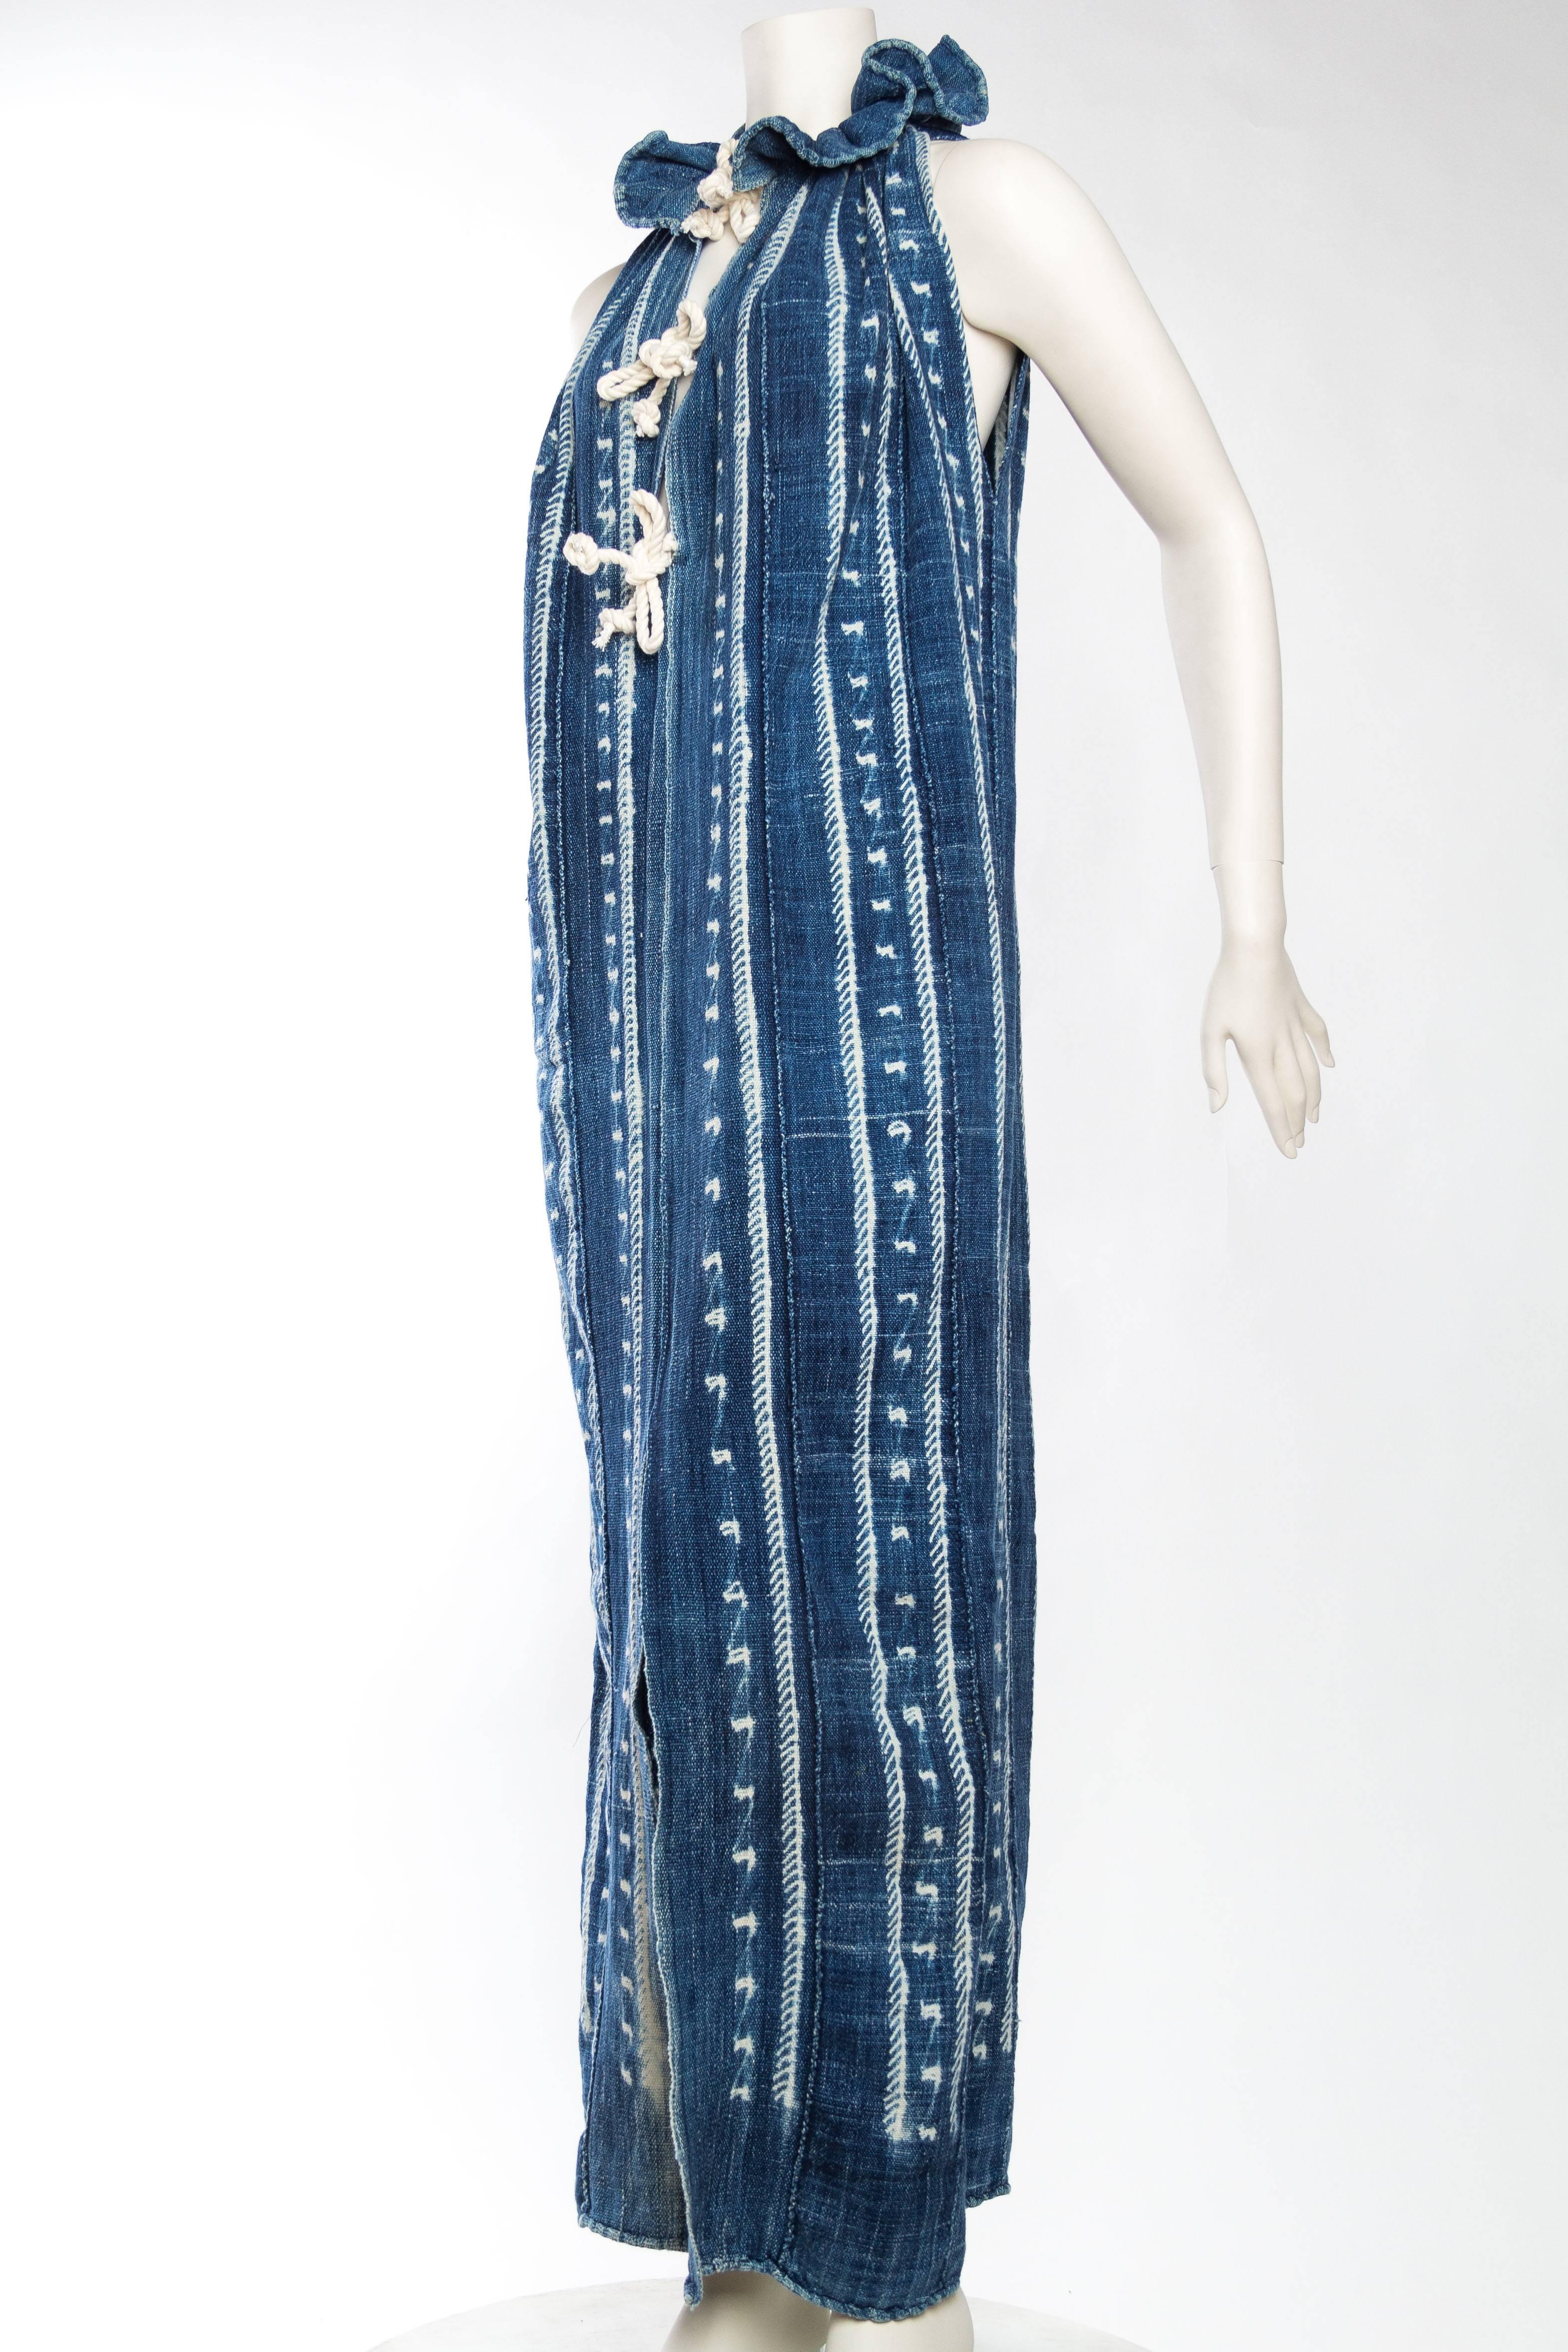 made from antique hand tie-dyed indigo fabric from west Africa. This dress is cut loose and easy with three cotton ropes to tie closed up the front. 